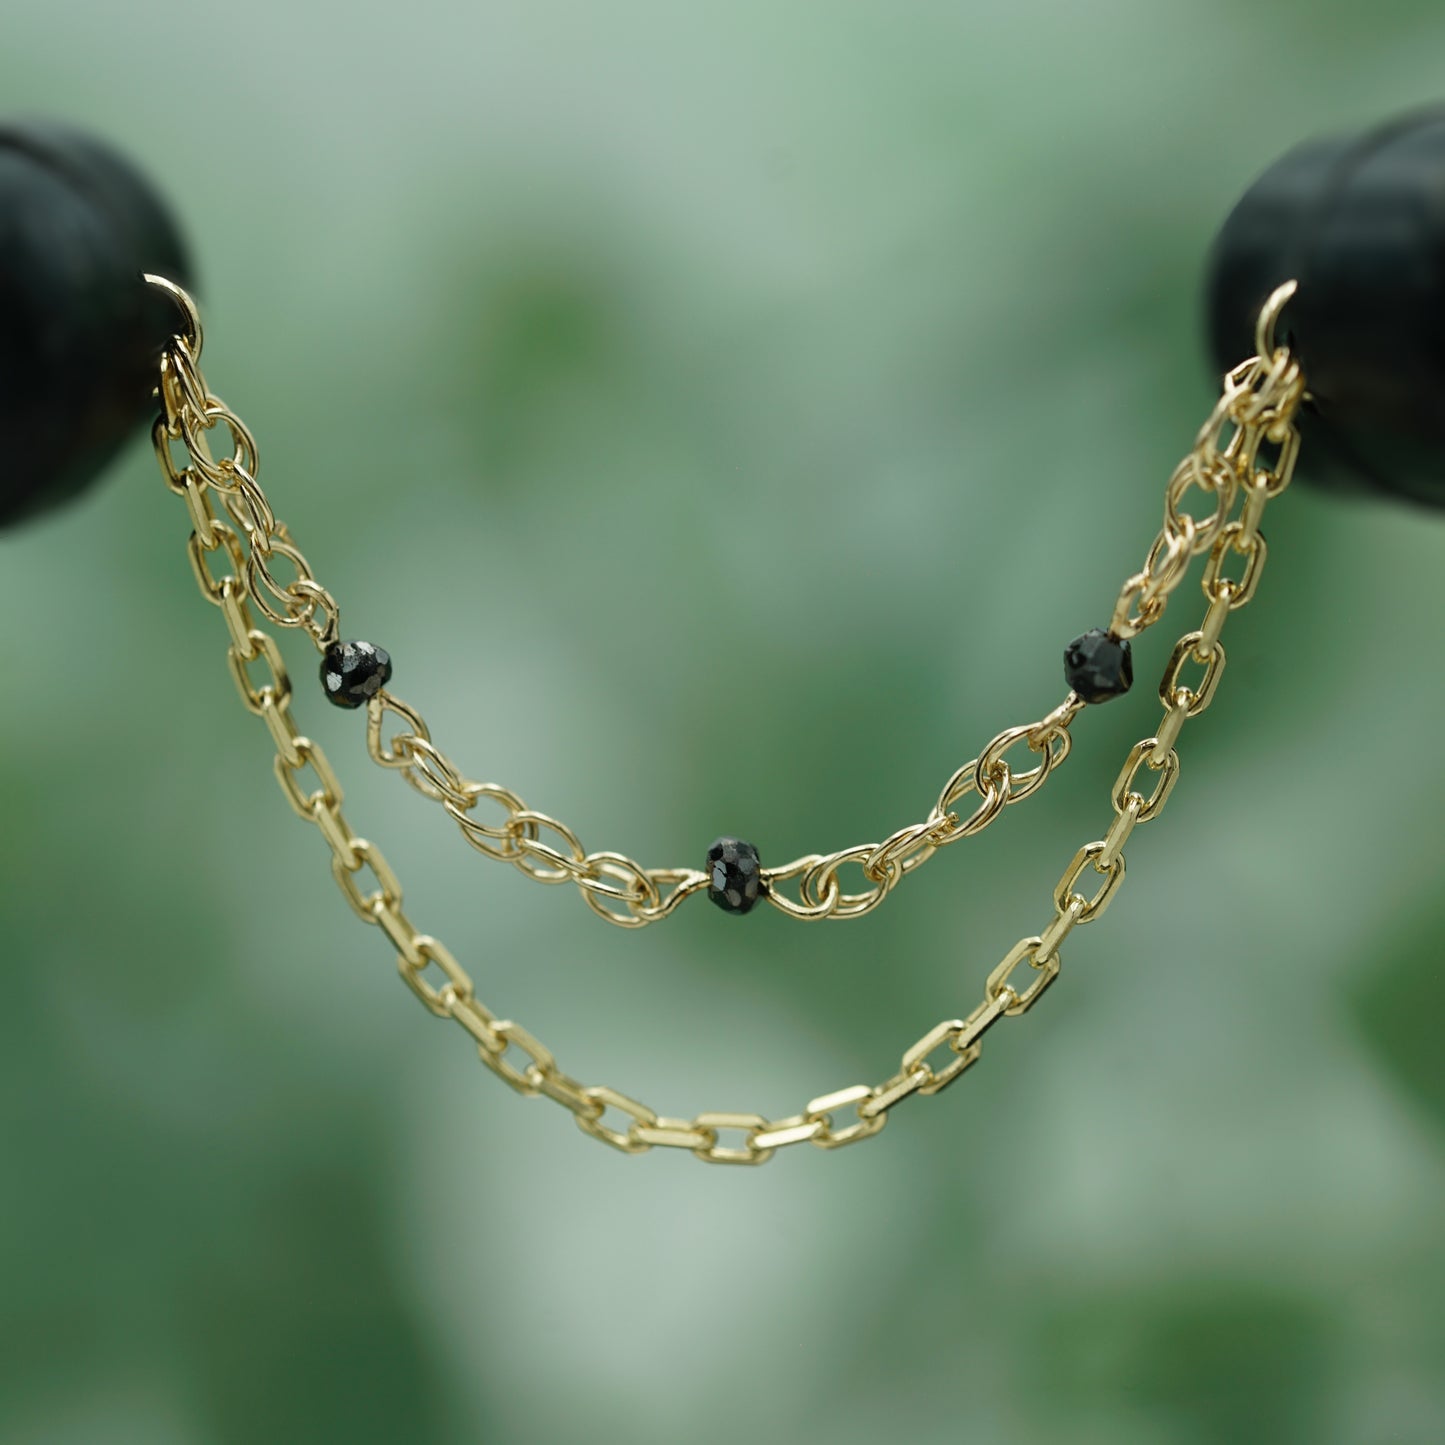 Rope 1.25mm and Diamond Cut Cable Chain 1.3mm with Black Diamond Beads - 14k Yellow Gold - Double Draping Chain